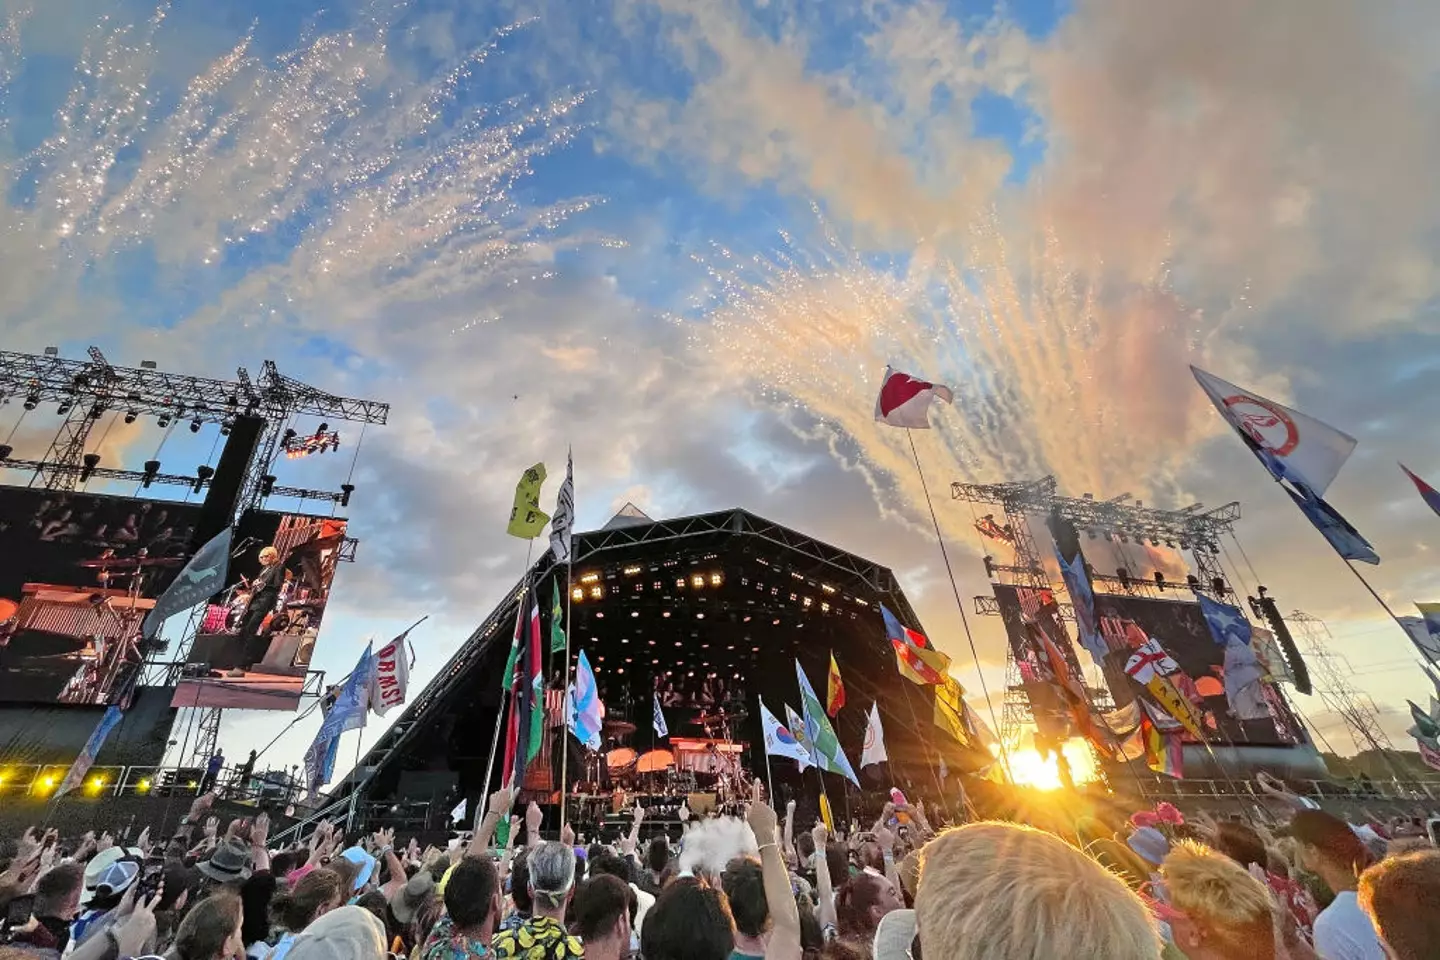 Glastonbury kicks off this week, which means recreational drug use is expected. (Photo by Jim Dyson/Redferns)